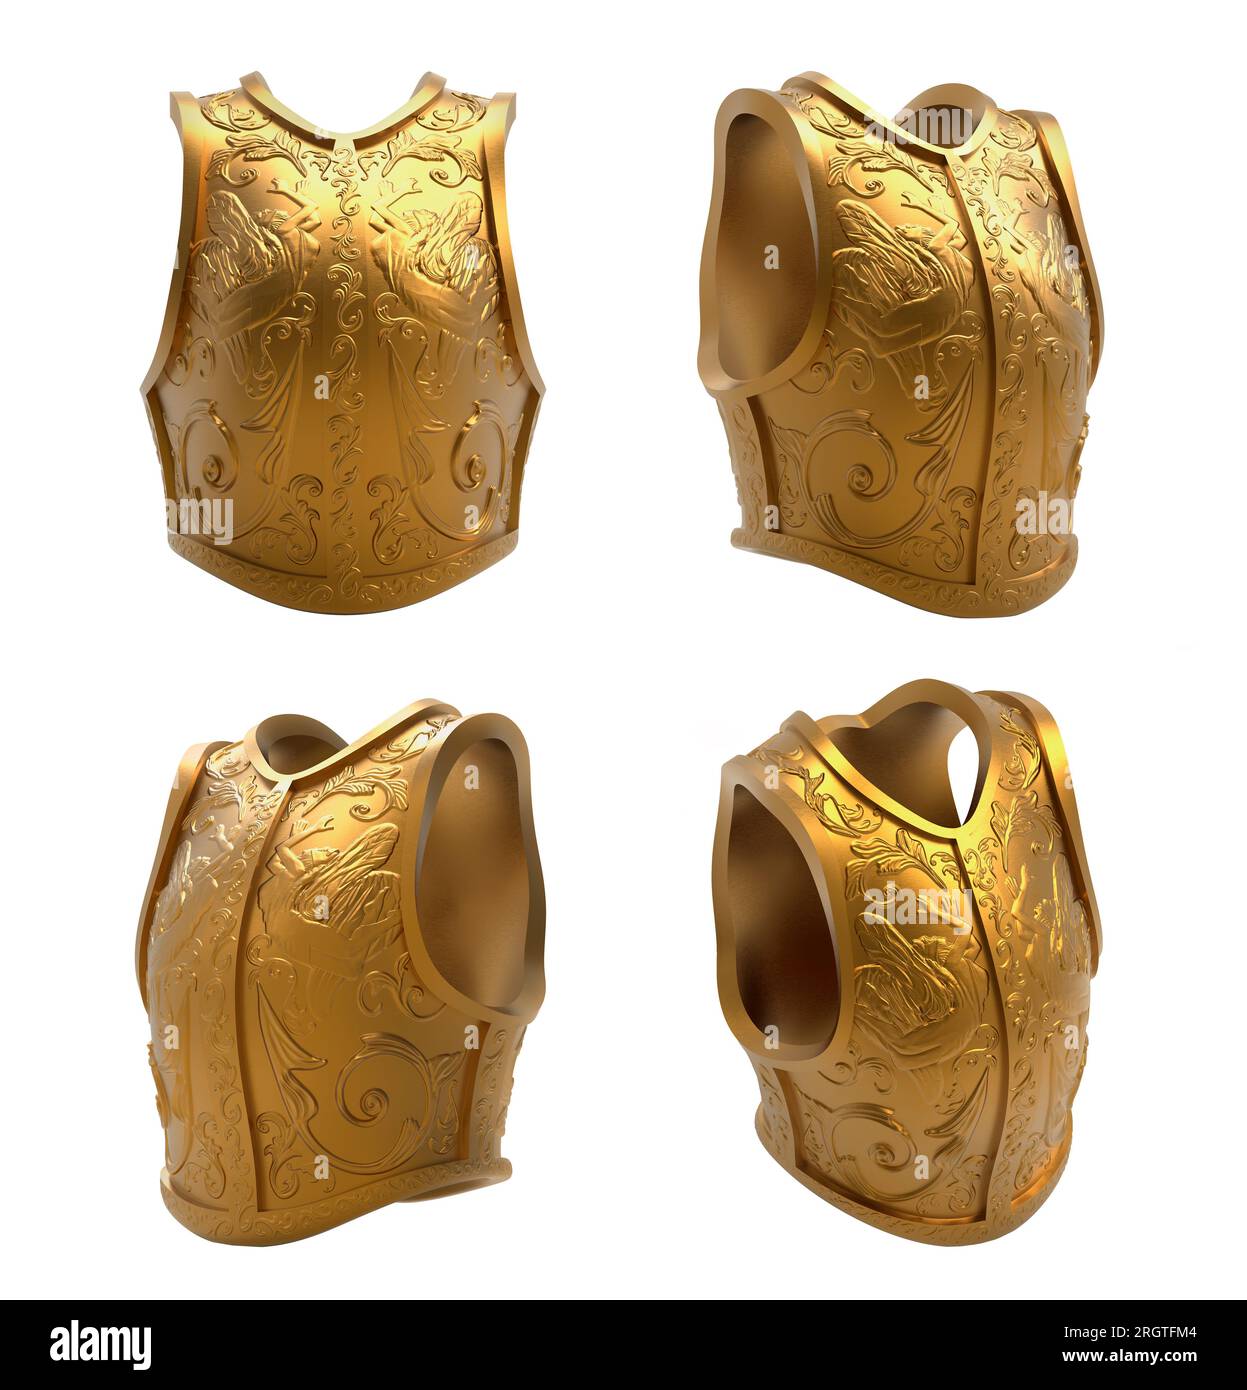 Isolated 3d render illustration of medieval golden warrior armor with ornaments and angel engravings. Stock Photo